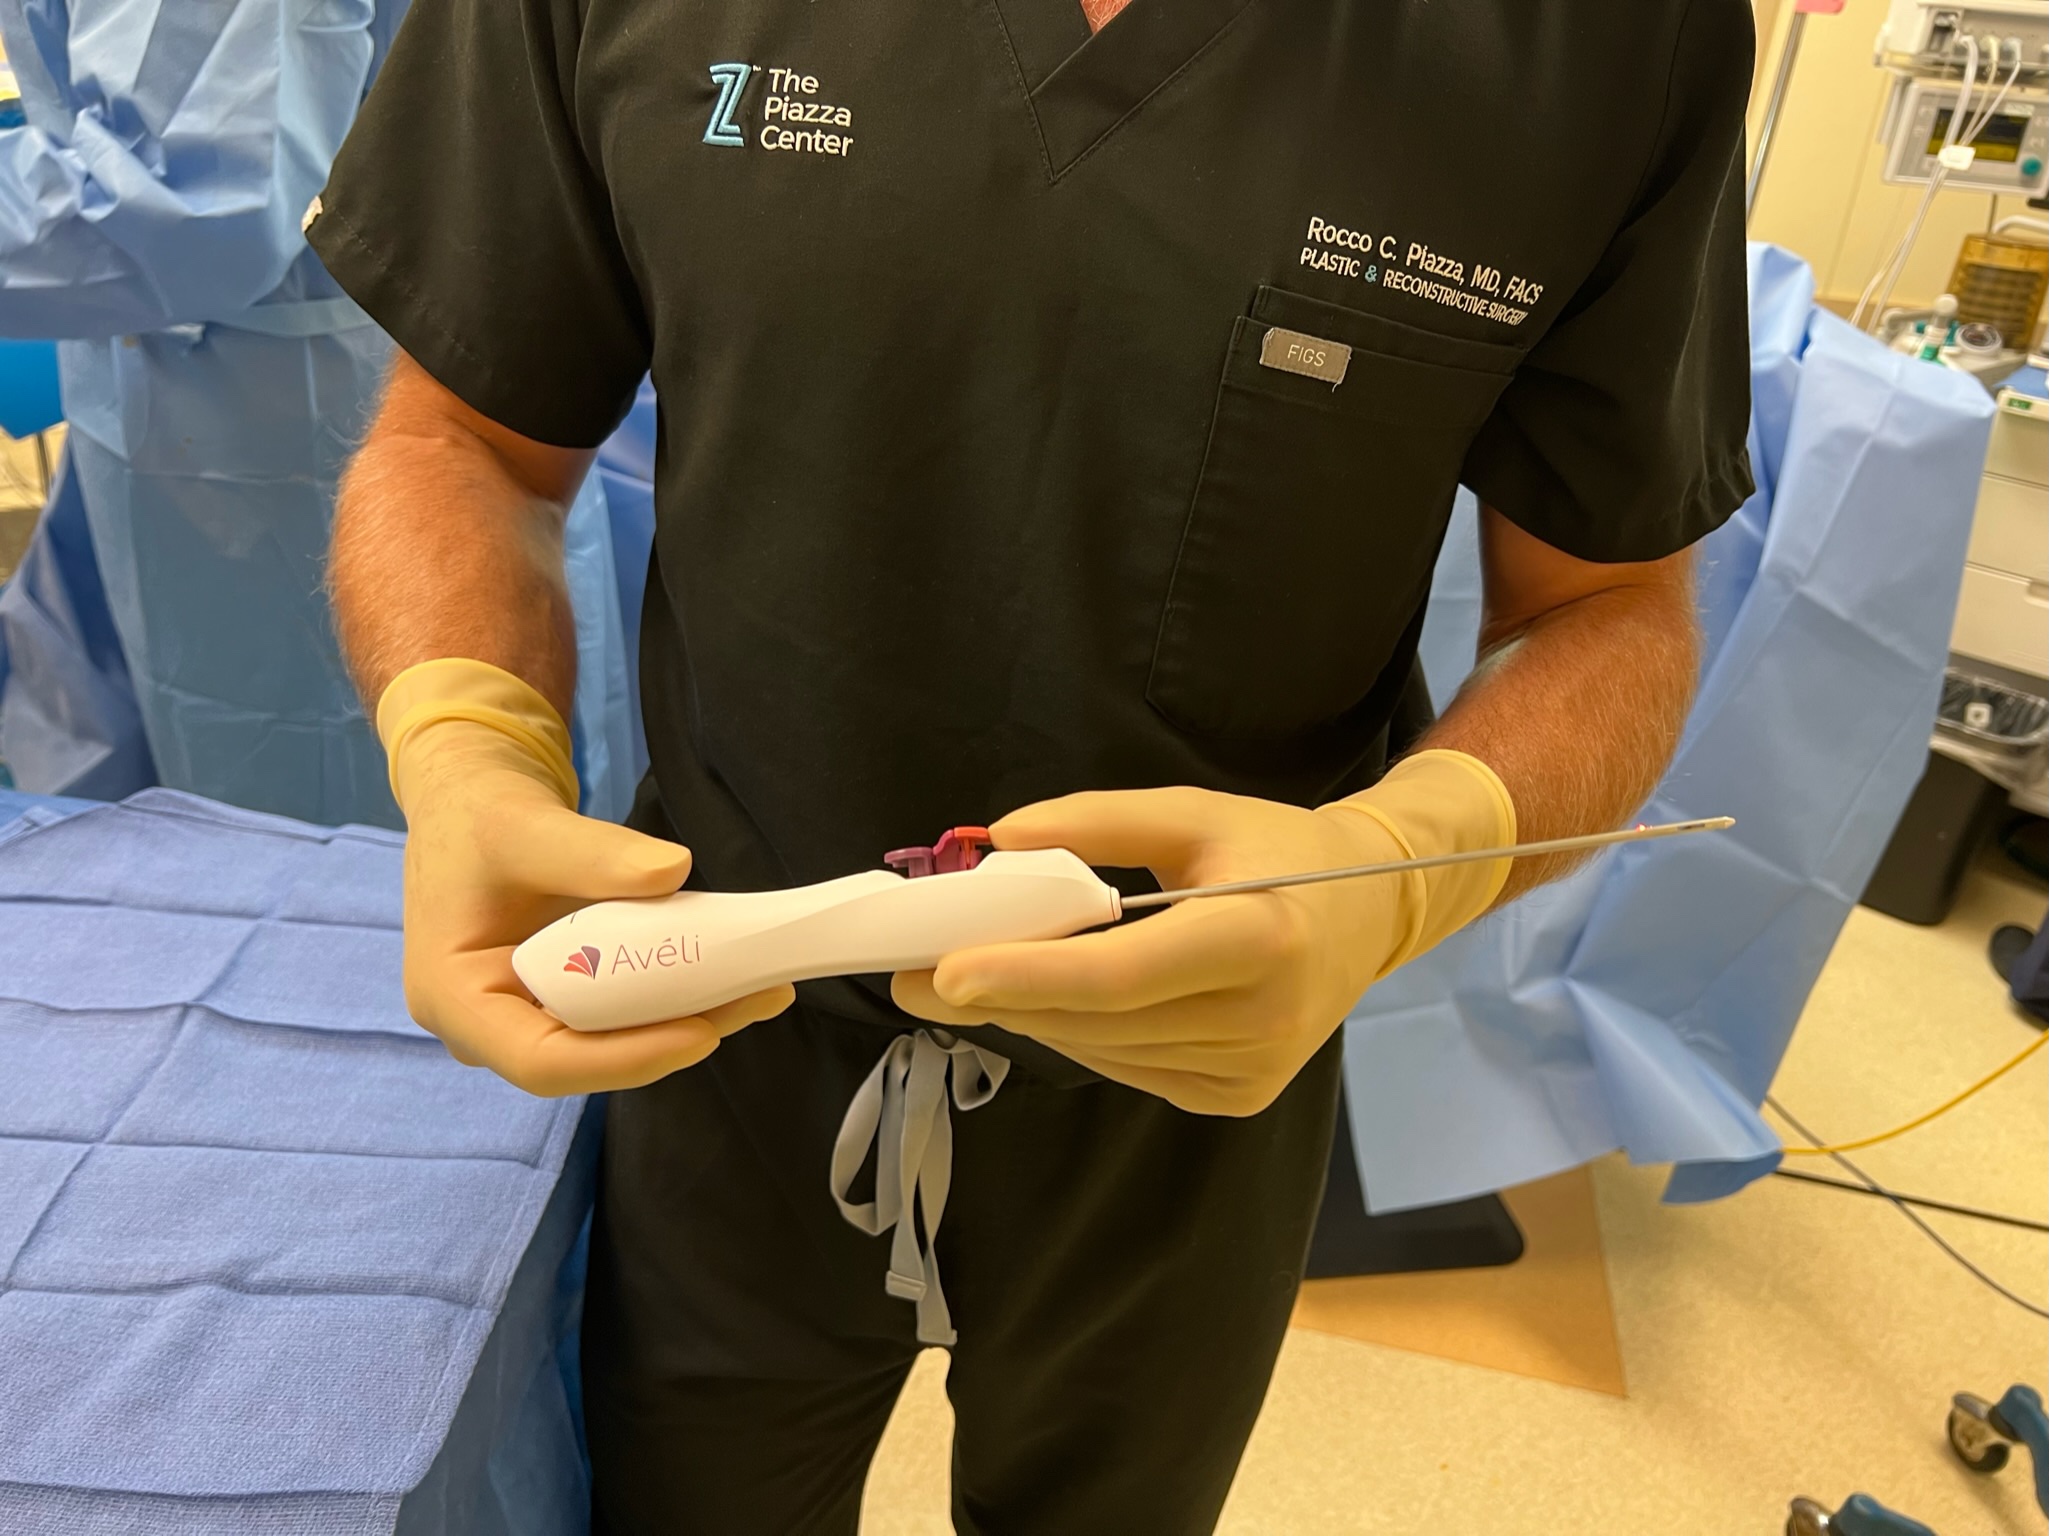 Close-up image of the Avéli® device, a handheld instrument used for minimally invasive cellulite reduction treatment.